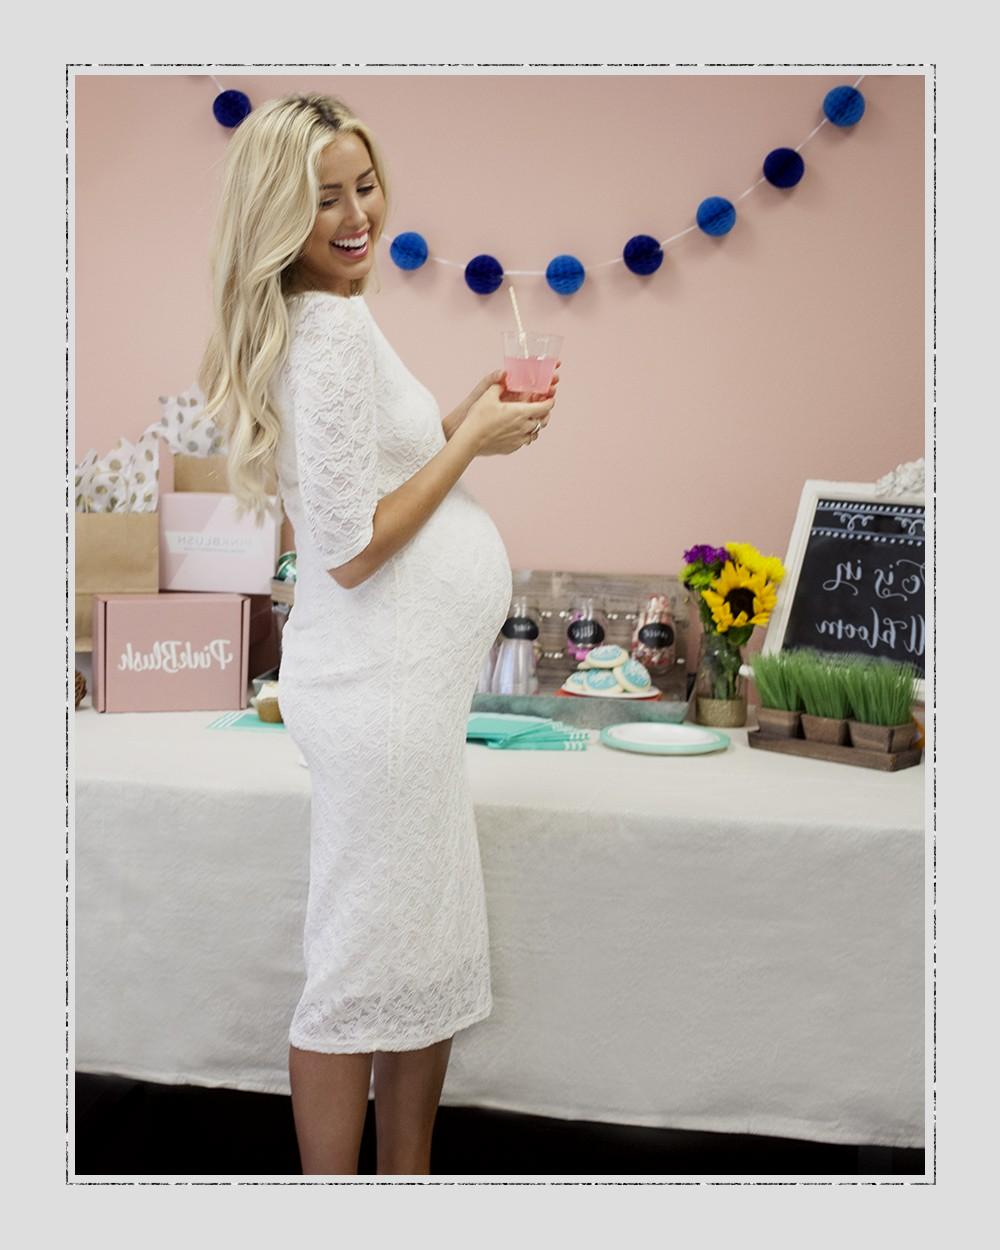 Full Size of Baby Shower:pink Maternity Dress Maternity Gowns For Photography Maternity Dresses For Baby Shower Mom And Dad Baby Shower Outfits Cute Baby Shower Outfits For Mom Maternity Maxi Dresses Maternity Dresses Maternity Gown Style